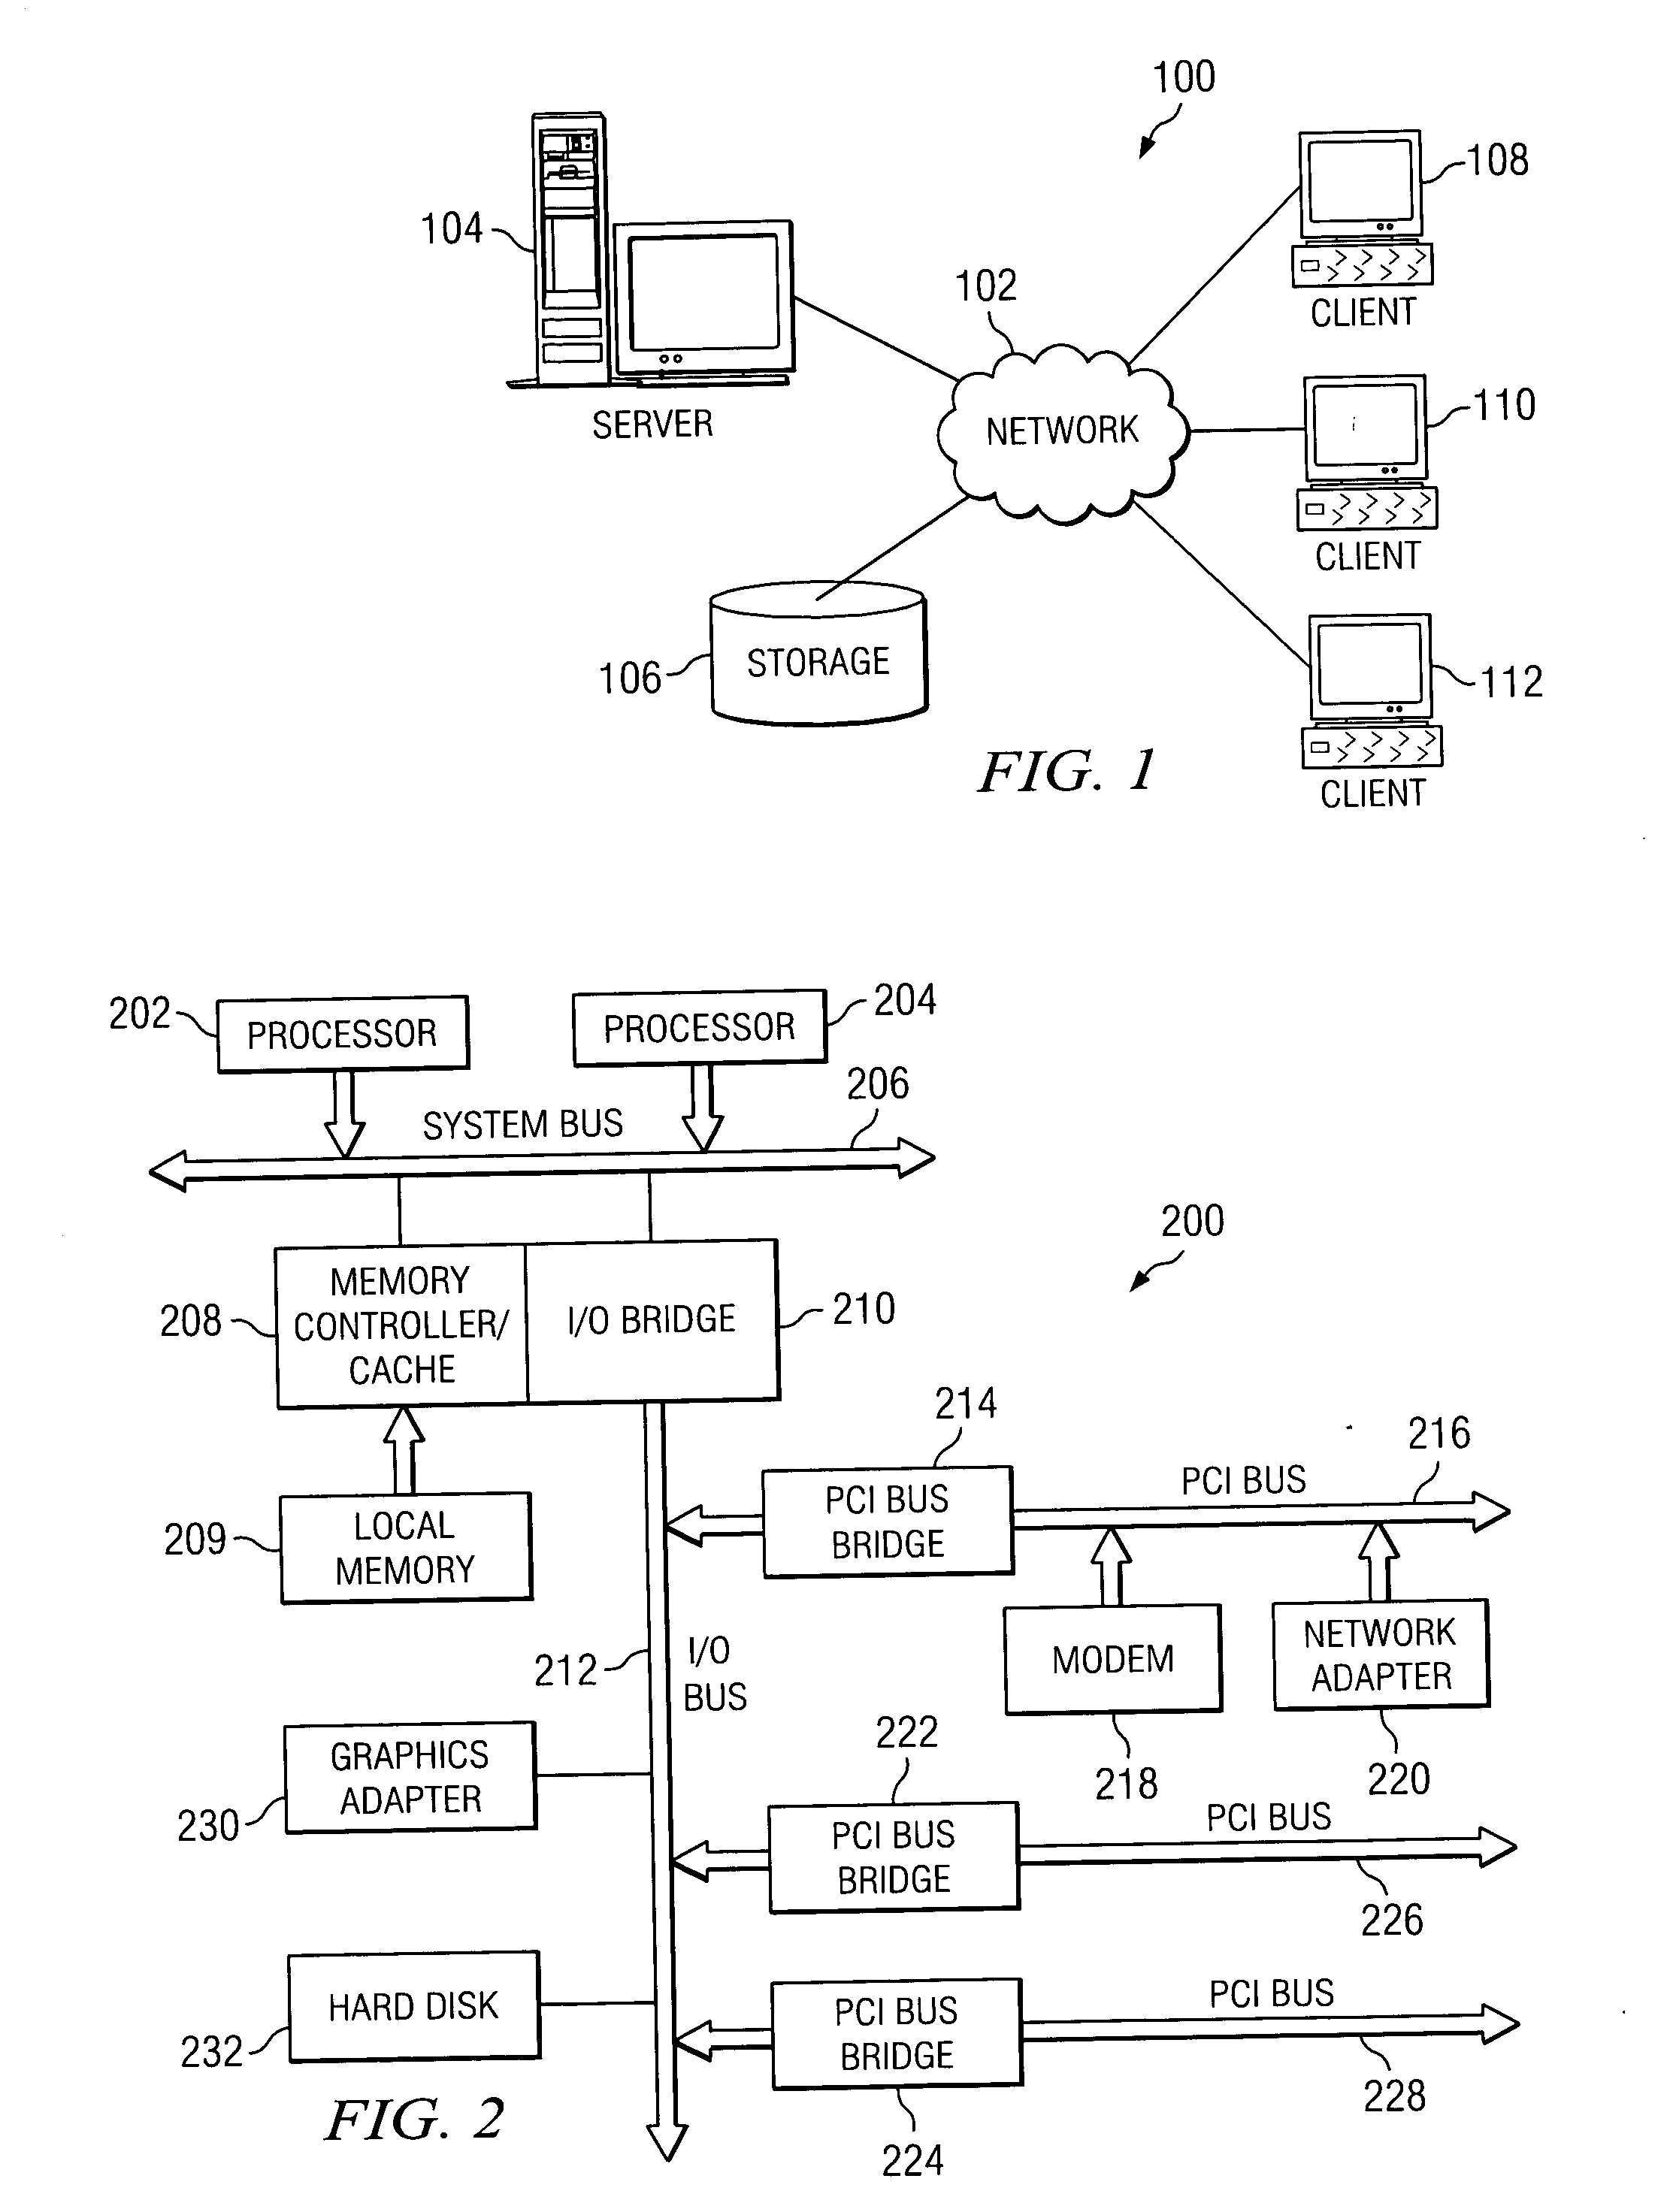 Apparatus and method for monitoring system health based on fuzzy metric data ranges and fuzzy rules